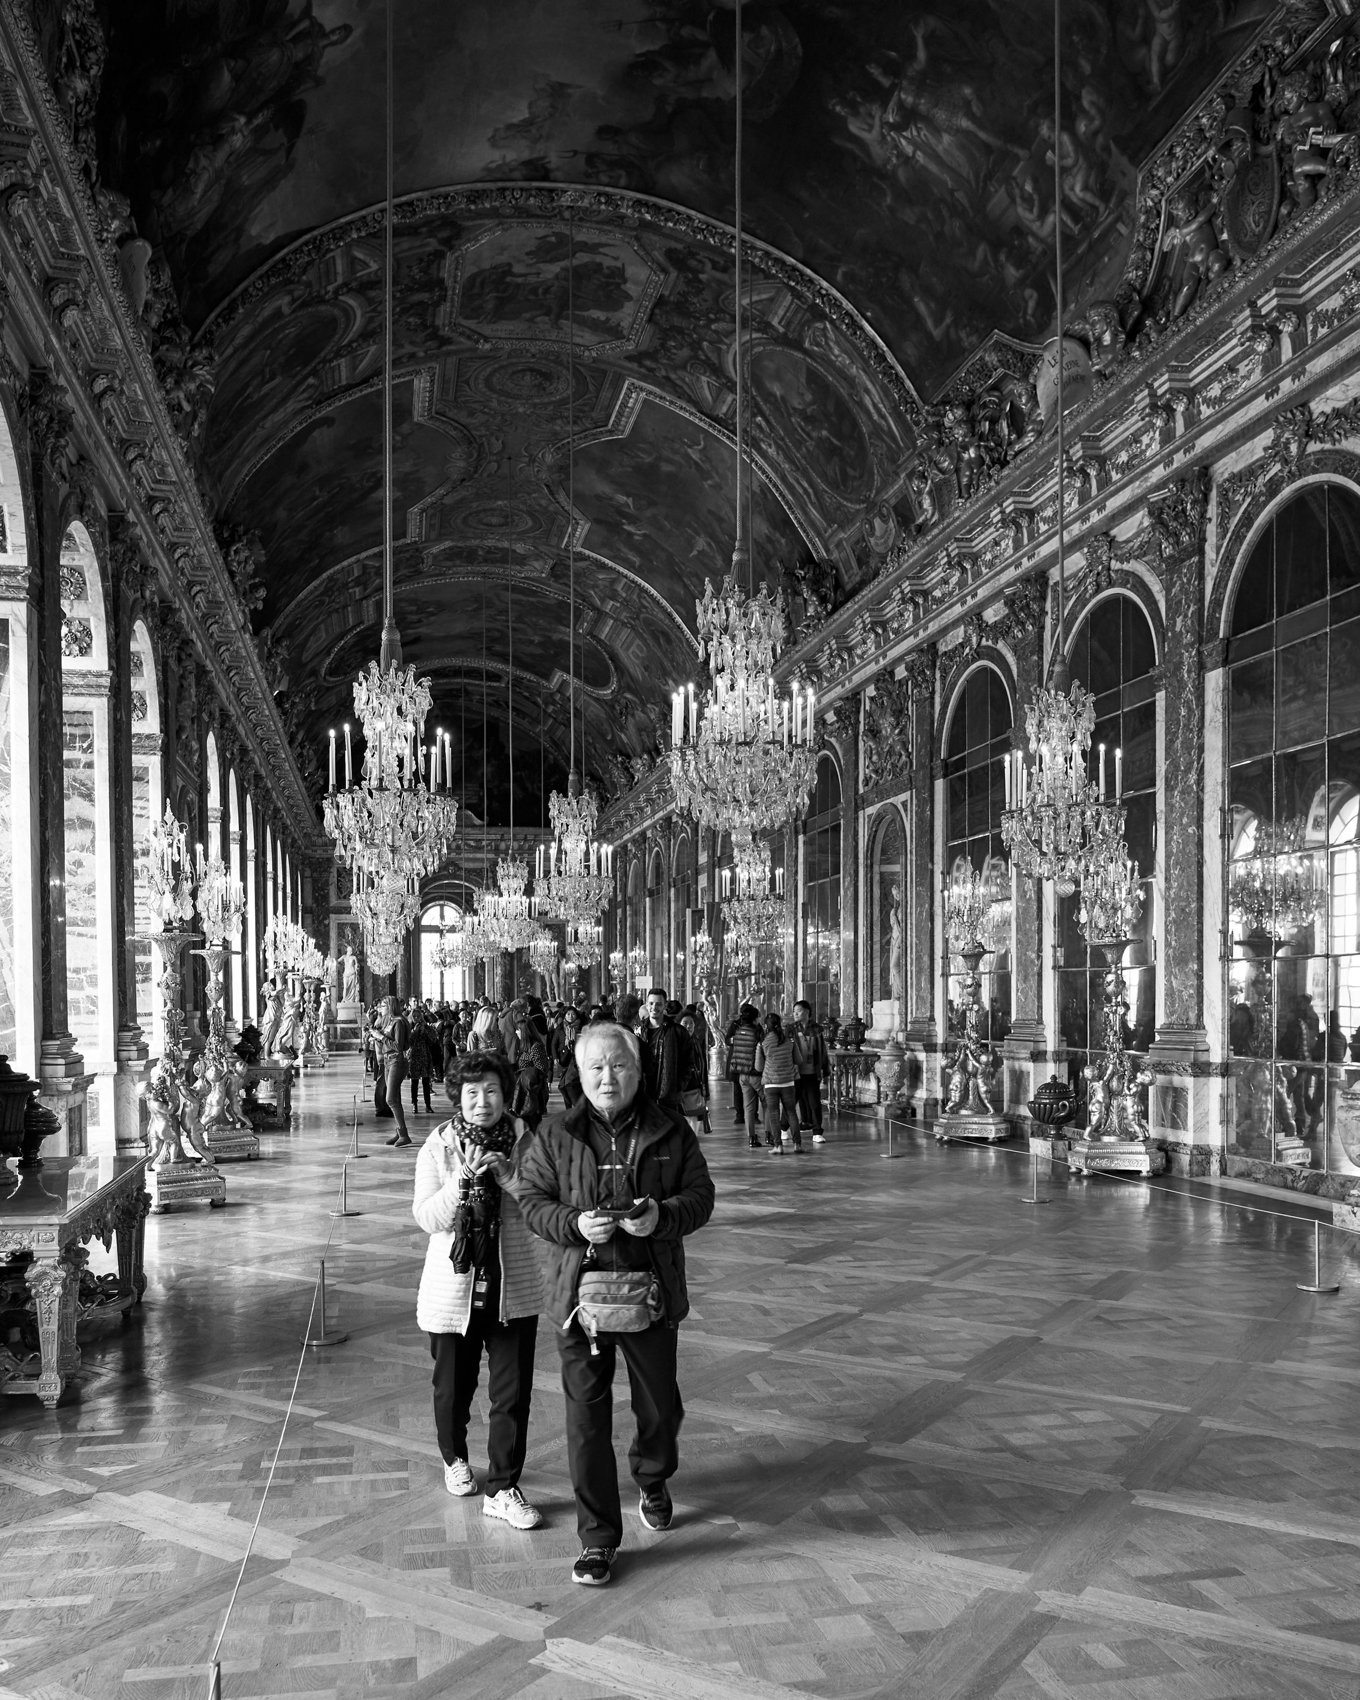 Hero Image for Chateau de Versailles (Hall of Mirrors, Gallery of Wars) 201911